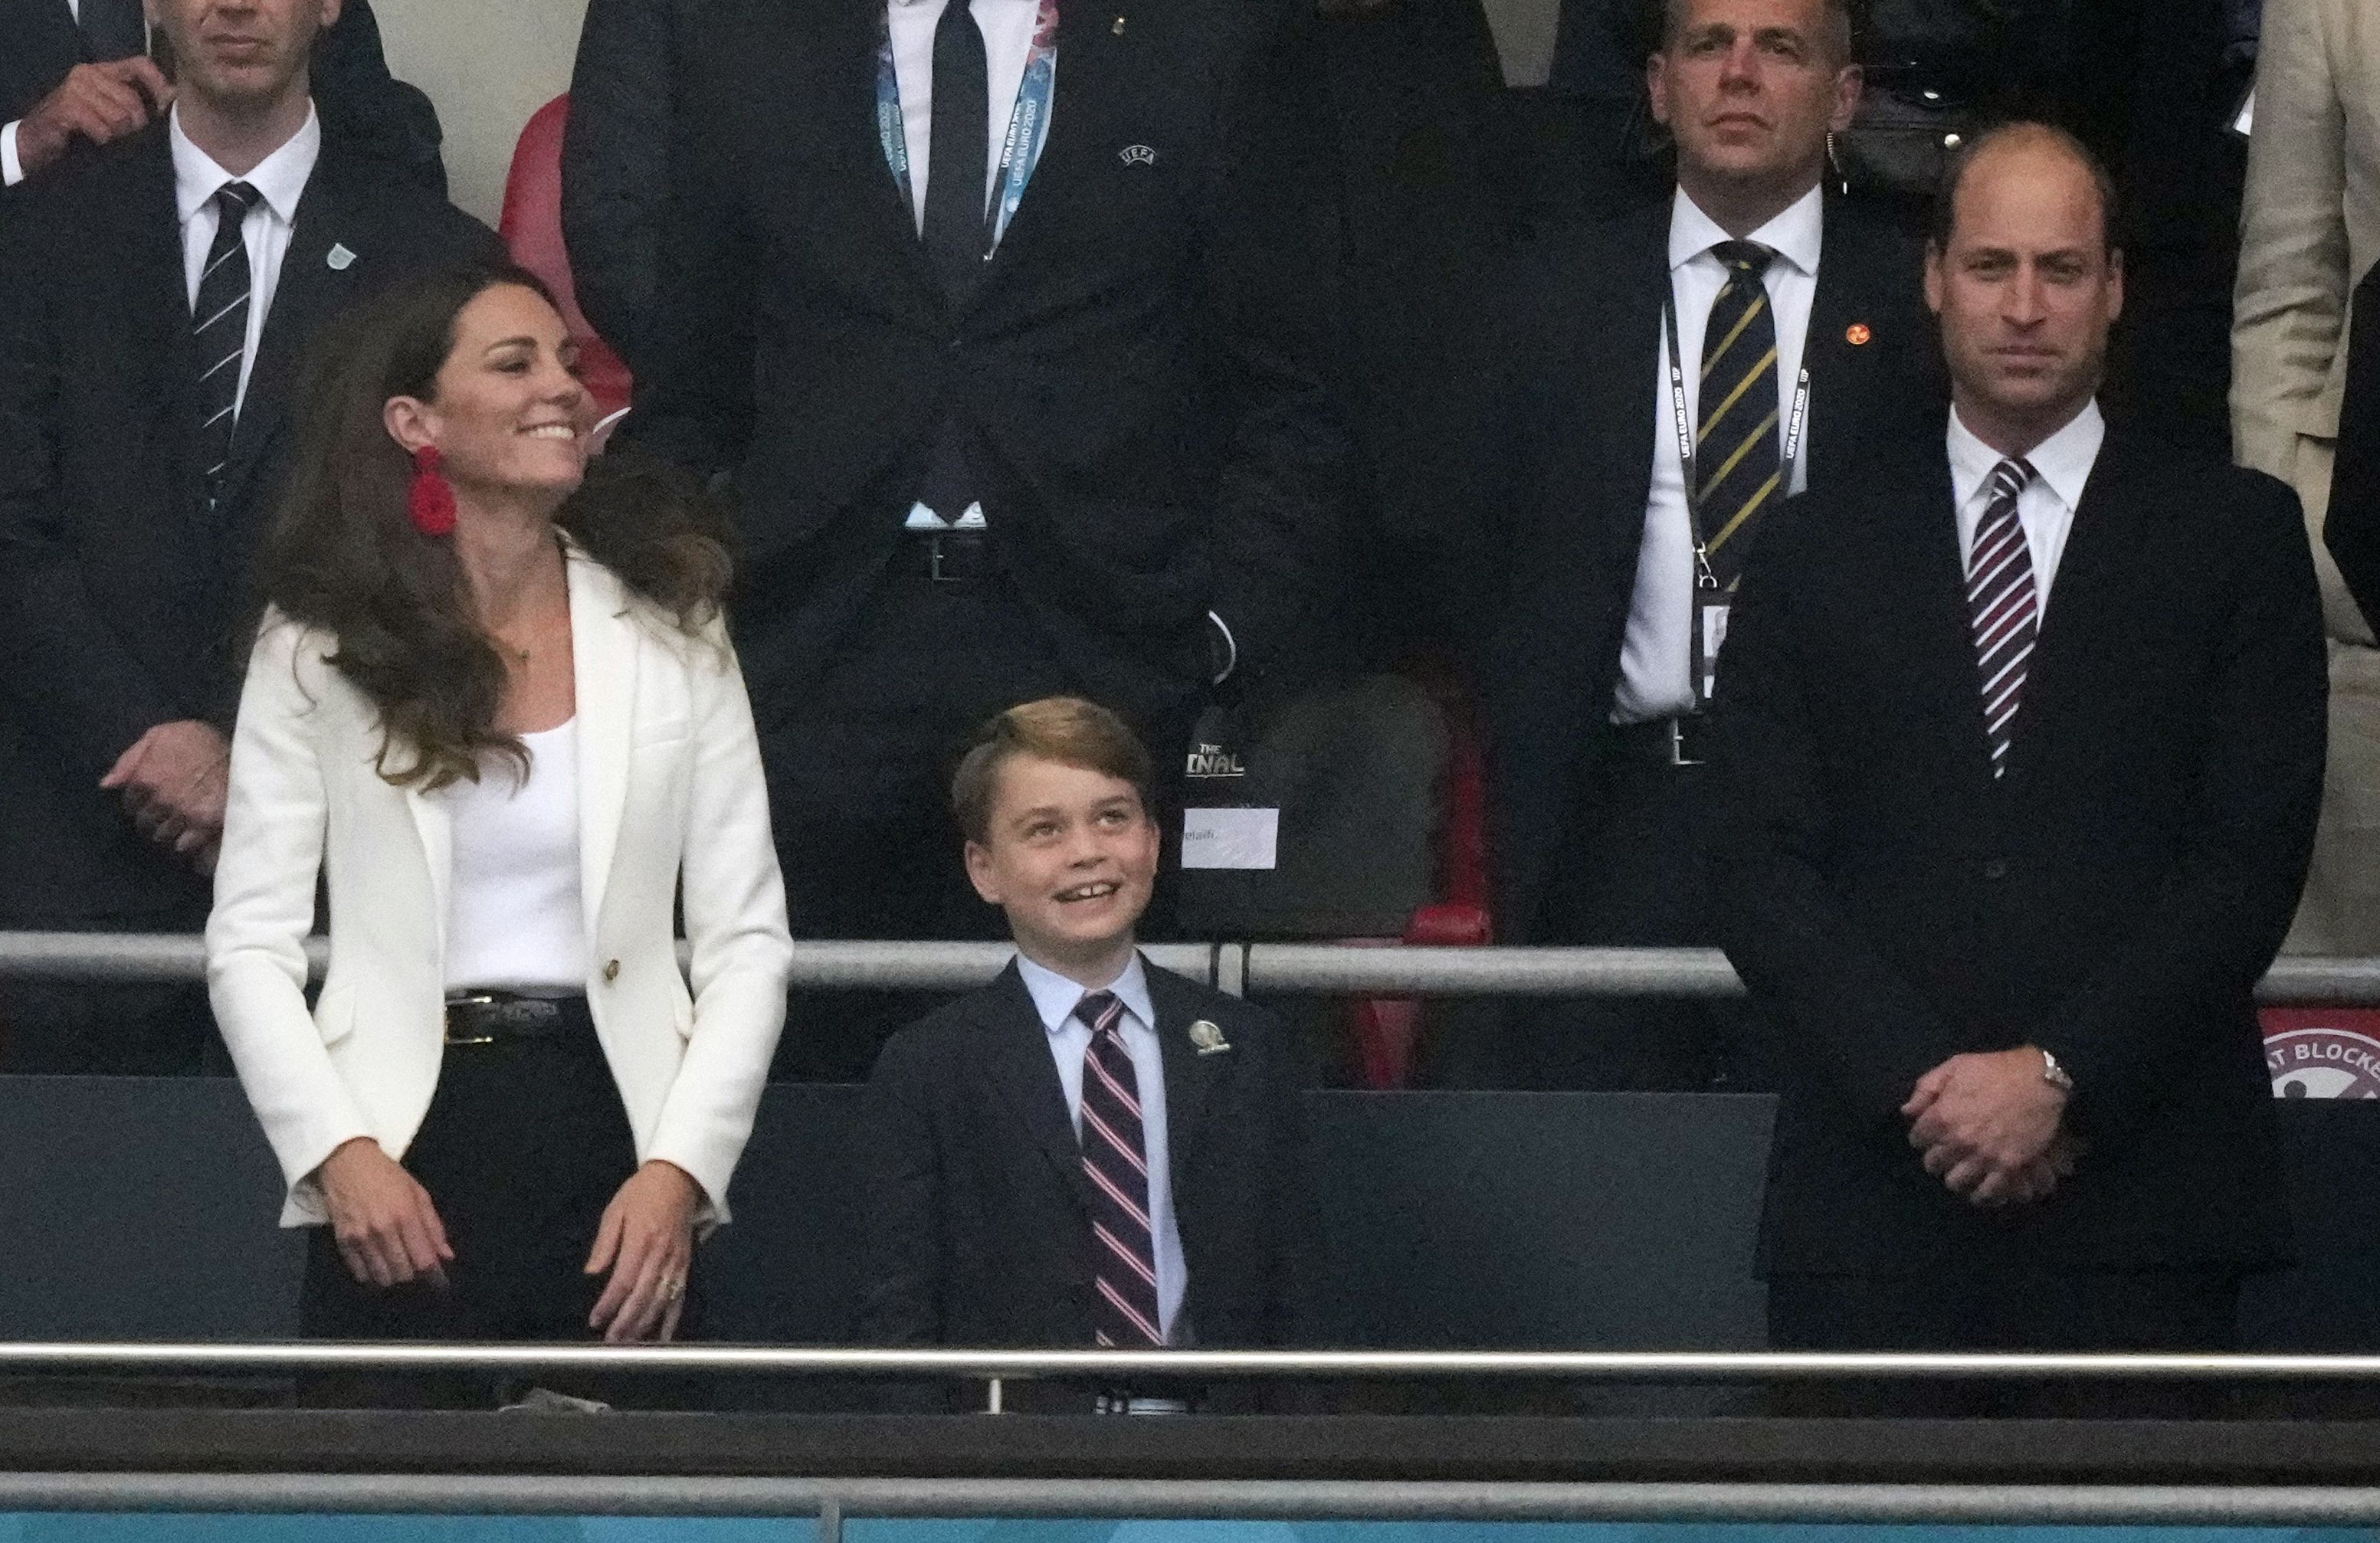 <p>Prince George and his parents appear in <span>the stands during the UEFA EURO 2020 football final between Italy and England in London on July 11, 2021. </span></p>